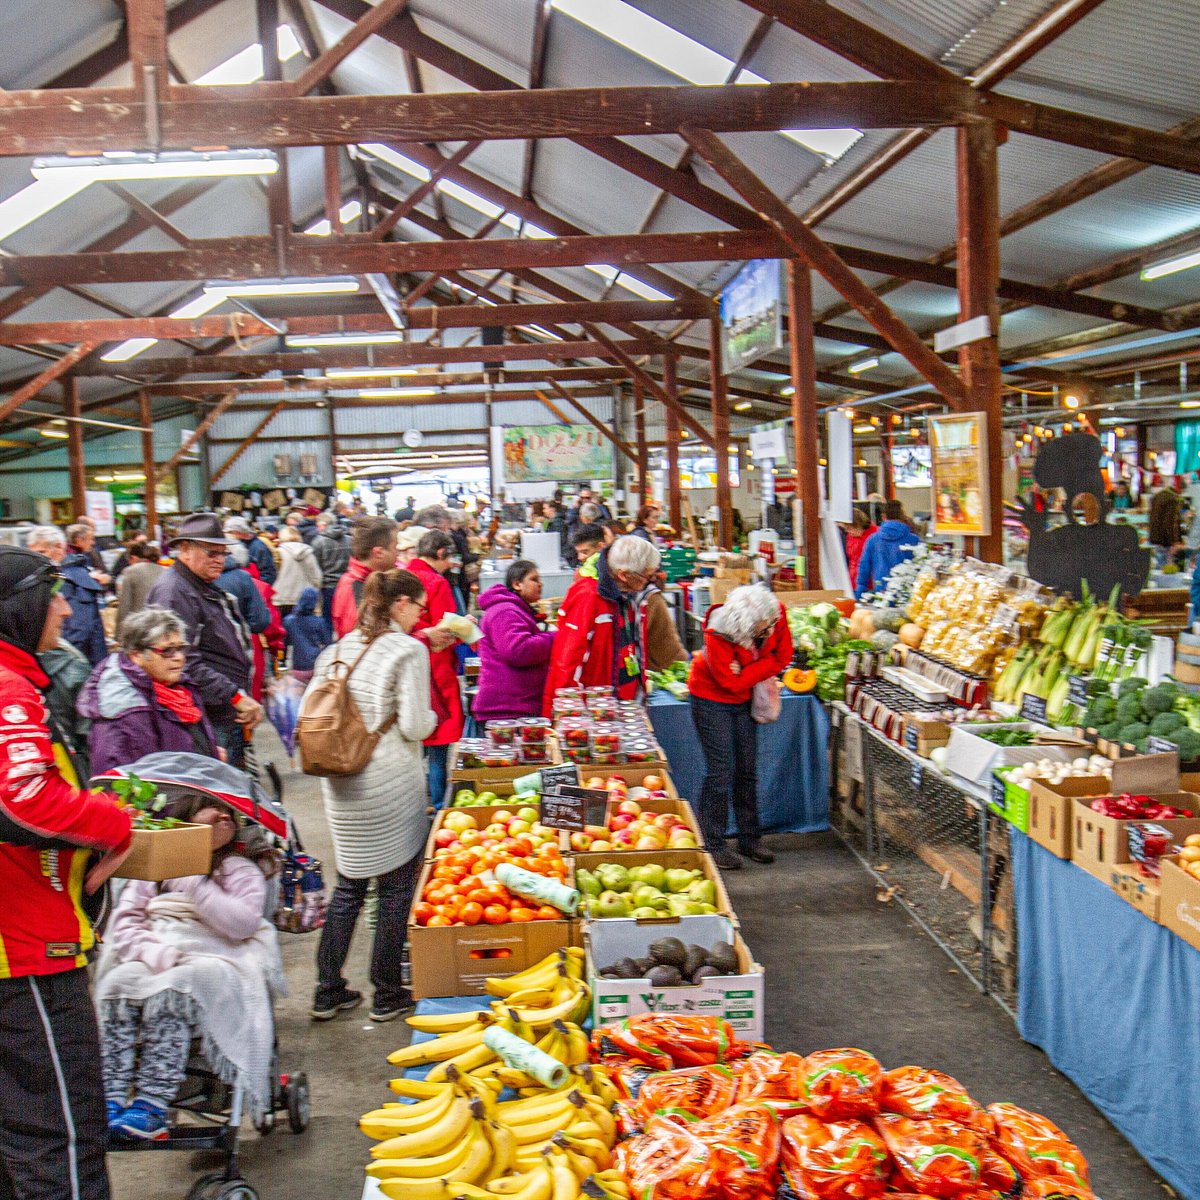 MOUNT PLEASANT FARMERS MARKET All You Need to Know BEFORE You Go